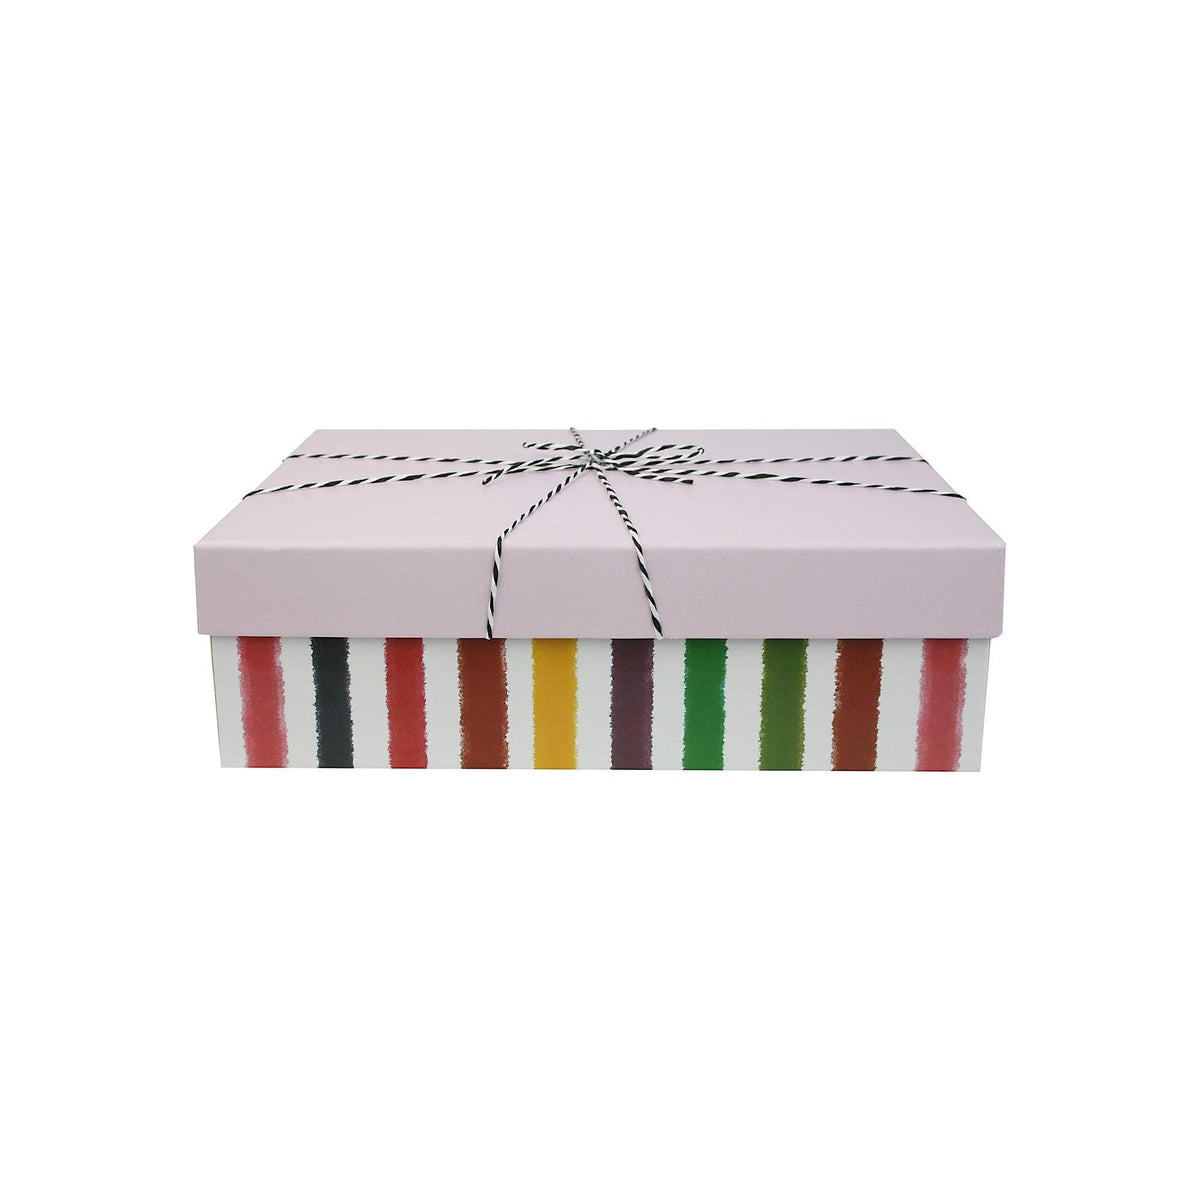 Single Pink Multicolored Stripes Gift Box (Sizes Available)